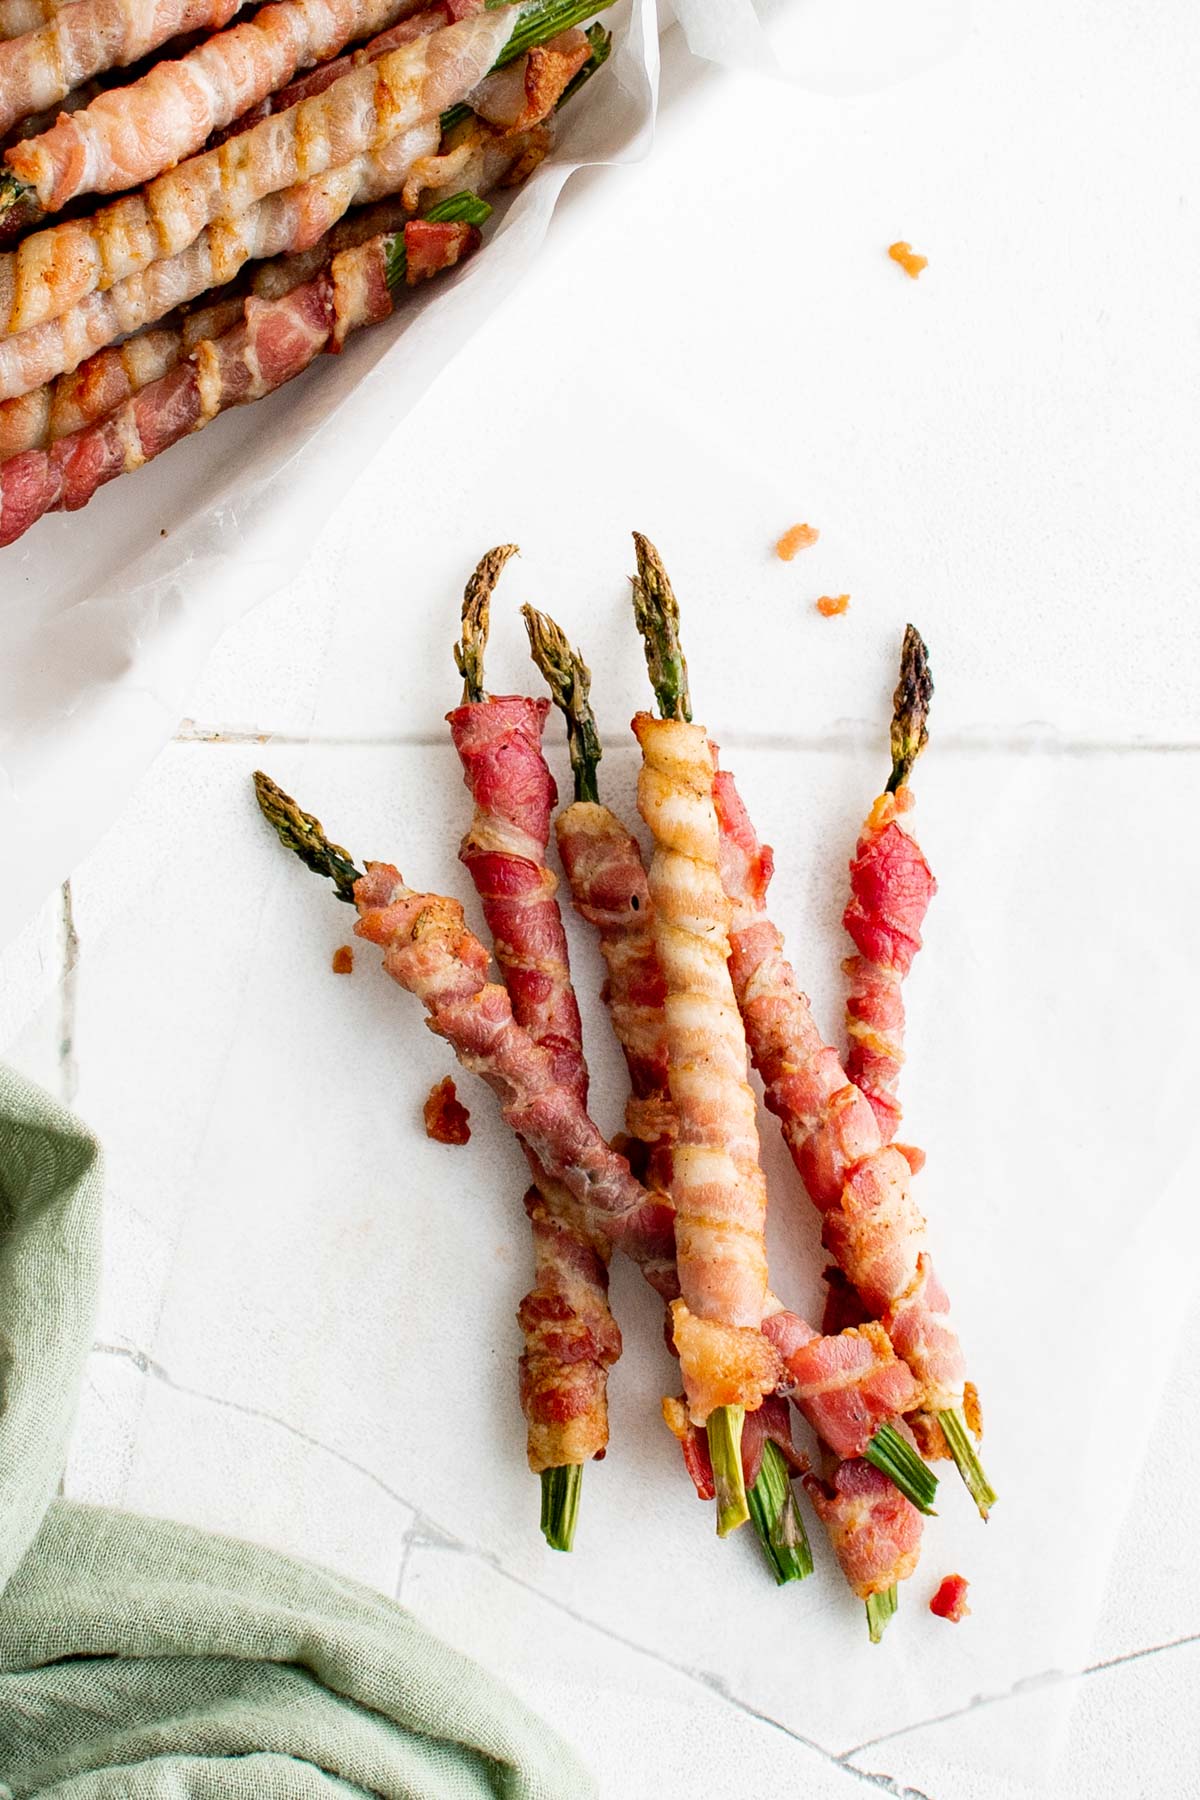 A few pieces of asparagus wrapped with bacon on a white background.